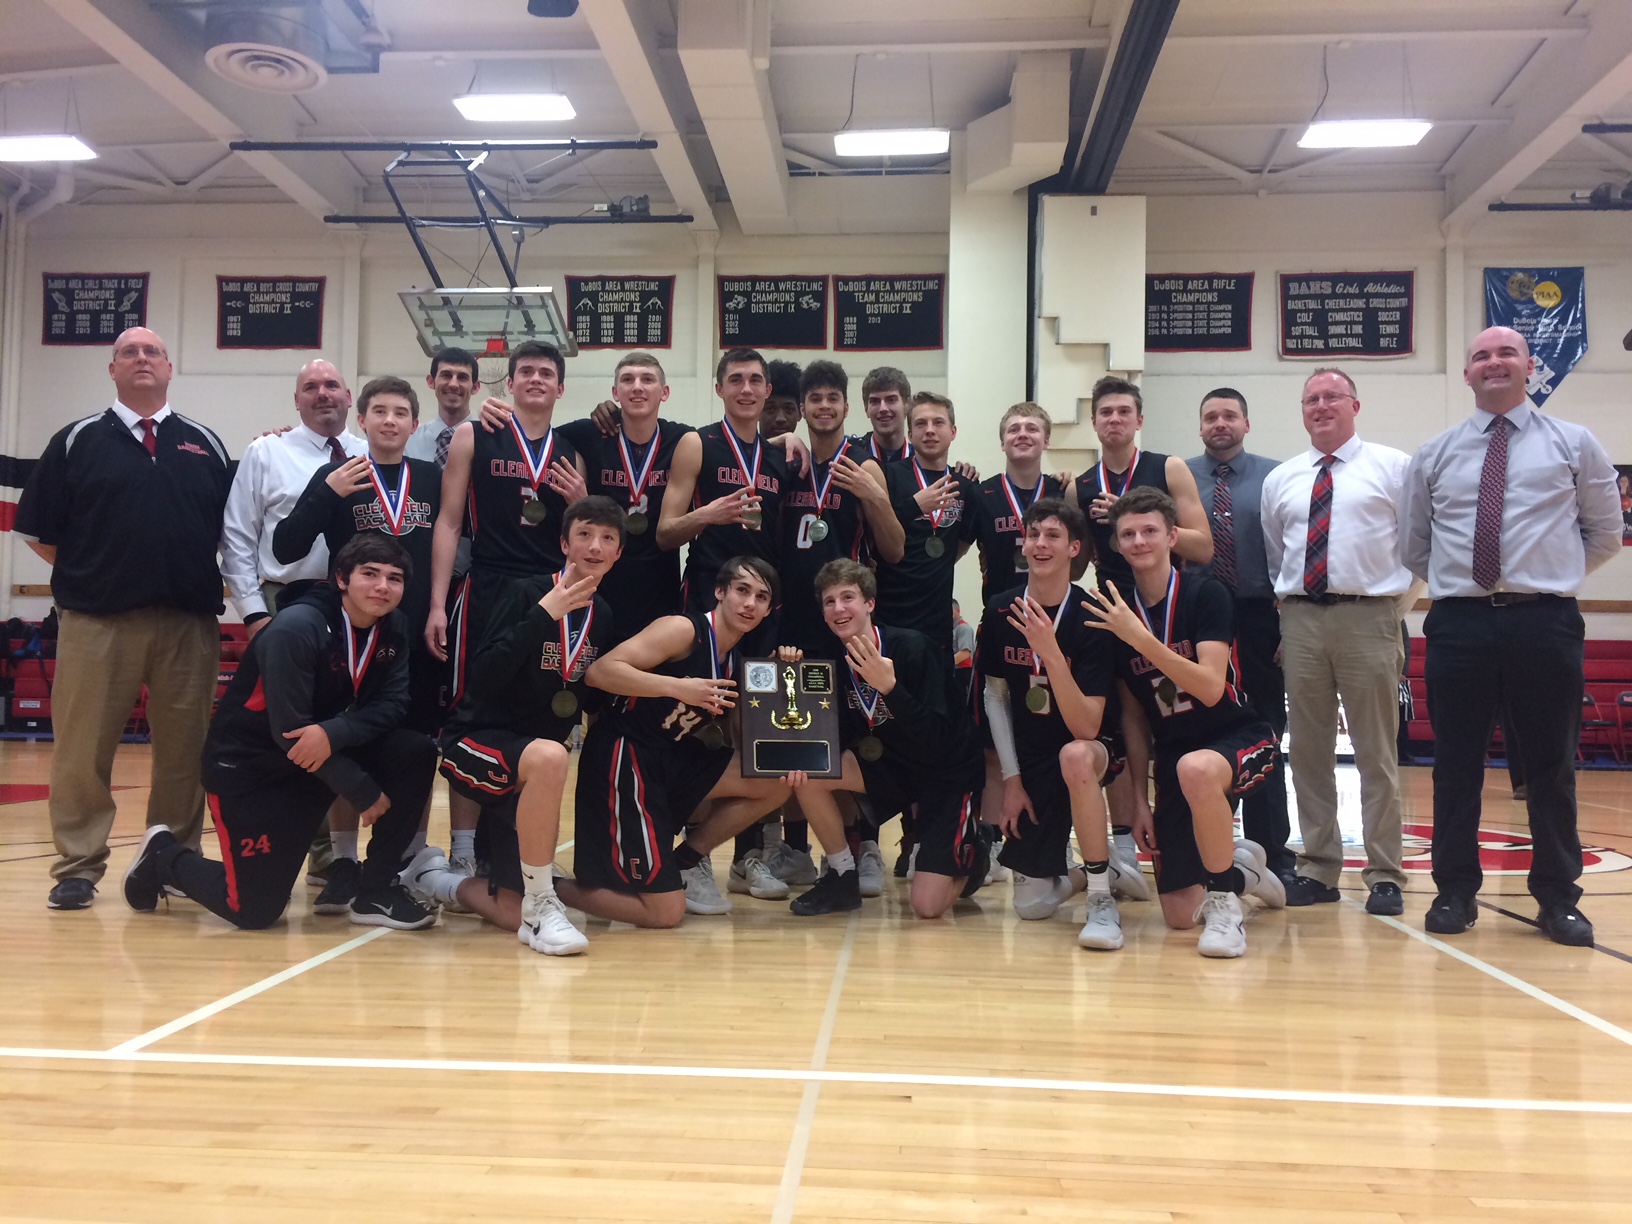 4-time District 9 Champions (Photo by Eve Siegel)